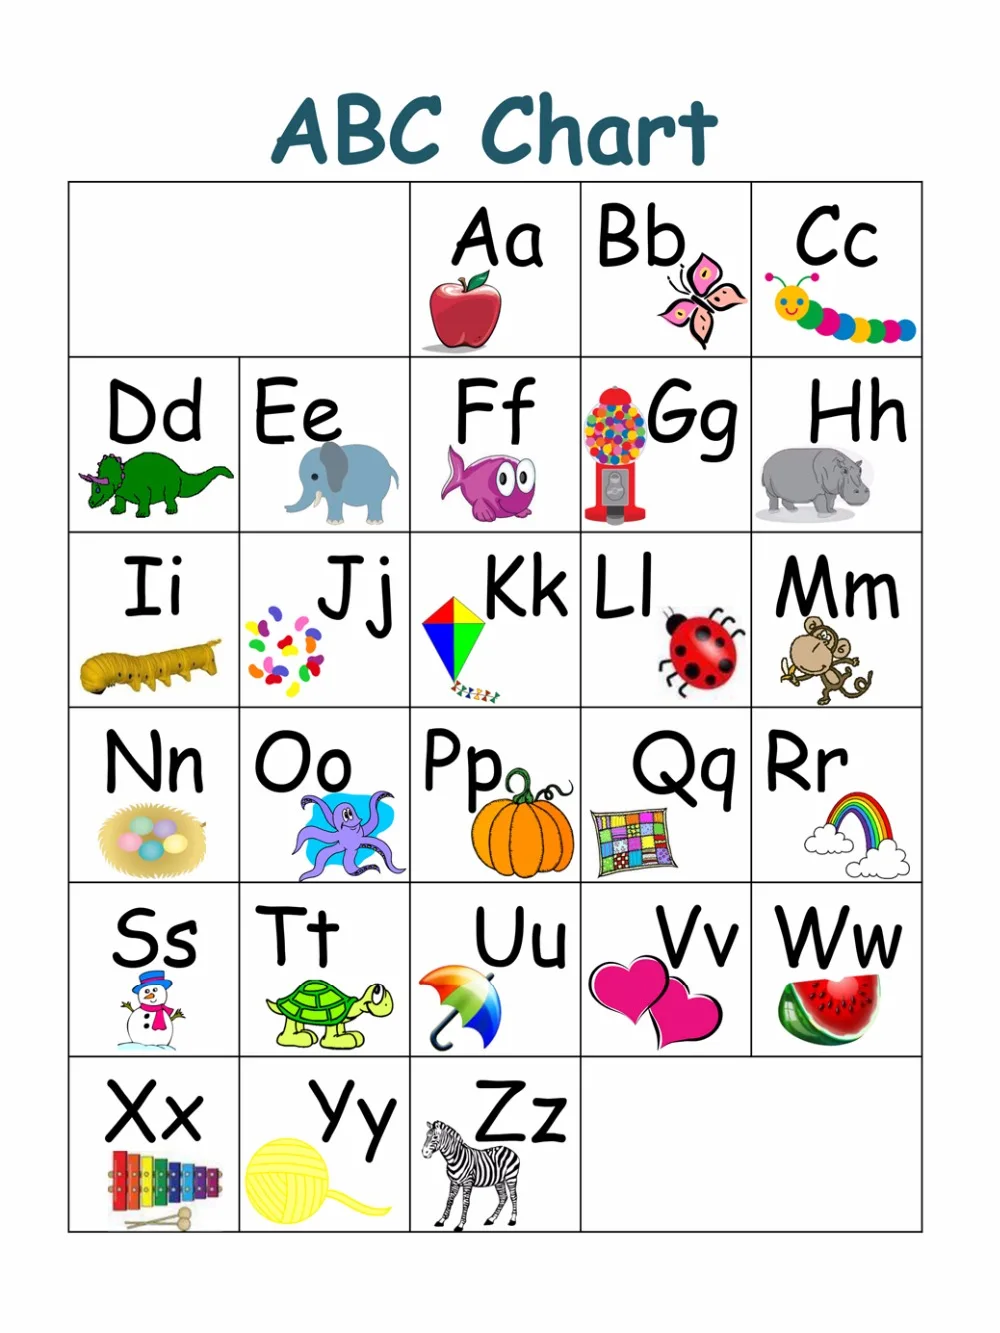 my-abc-alphabet-learn-table-children-s-mathematical-education-learning-canvas-fabric-posters-10